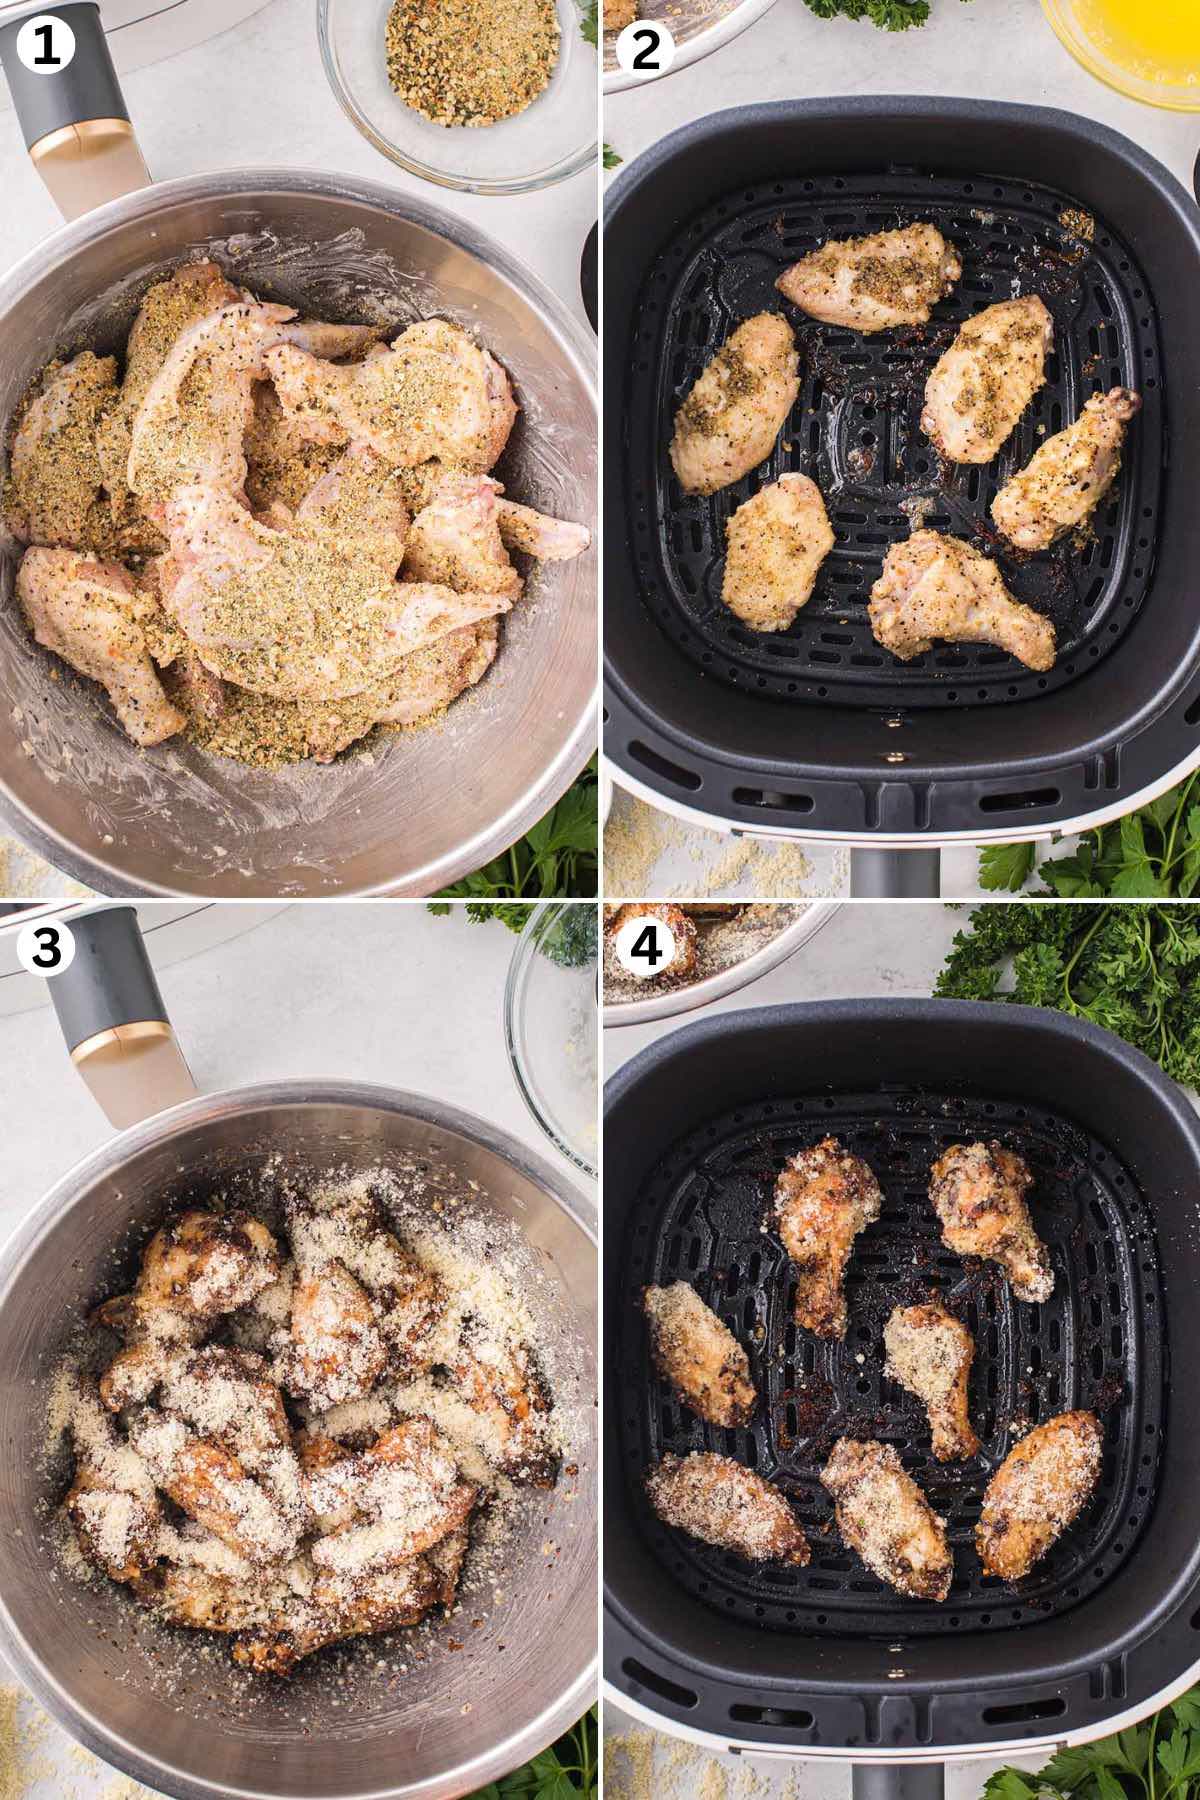 Sprinkle the seasonings all over the chicken. Place chicken wings in the air fryer. Toss the wings in the melted butter mixture and sprinkle parmesan cheese. Return it to the air fryer.